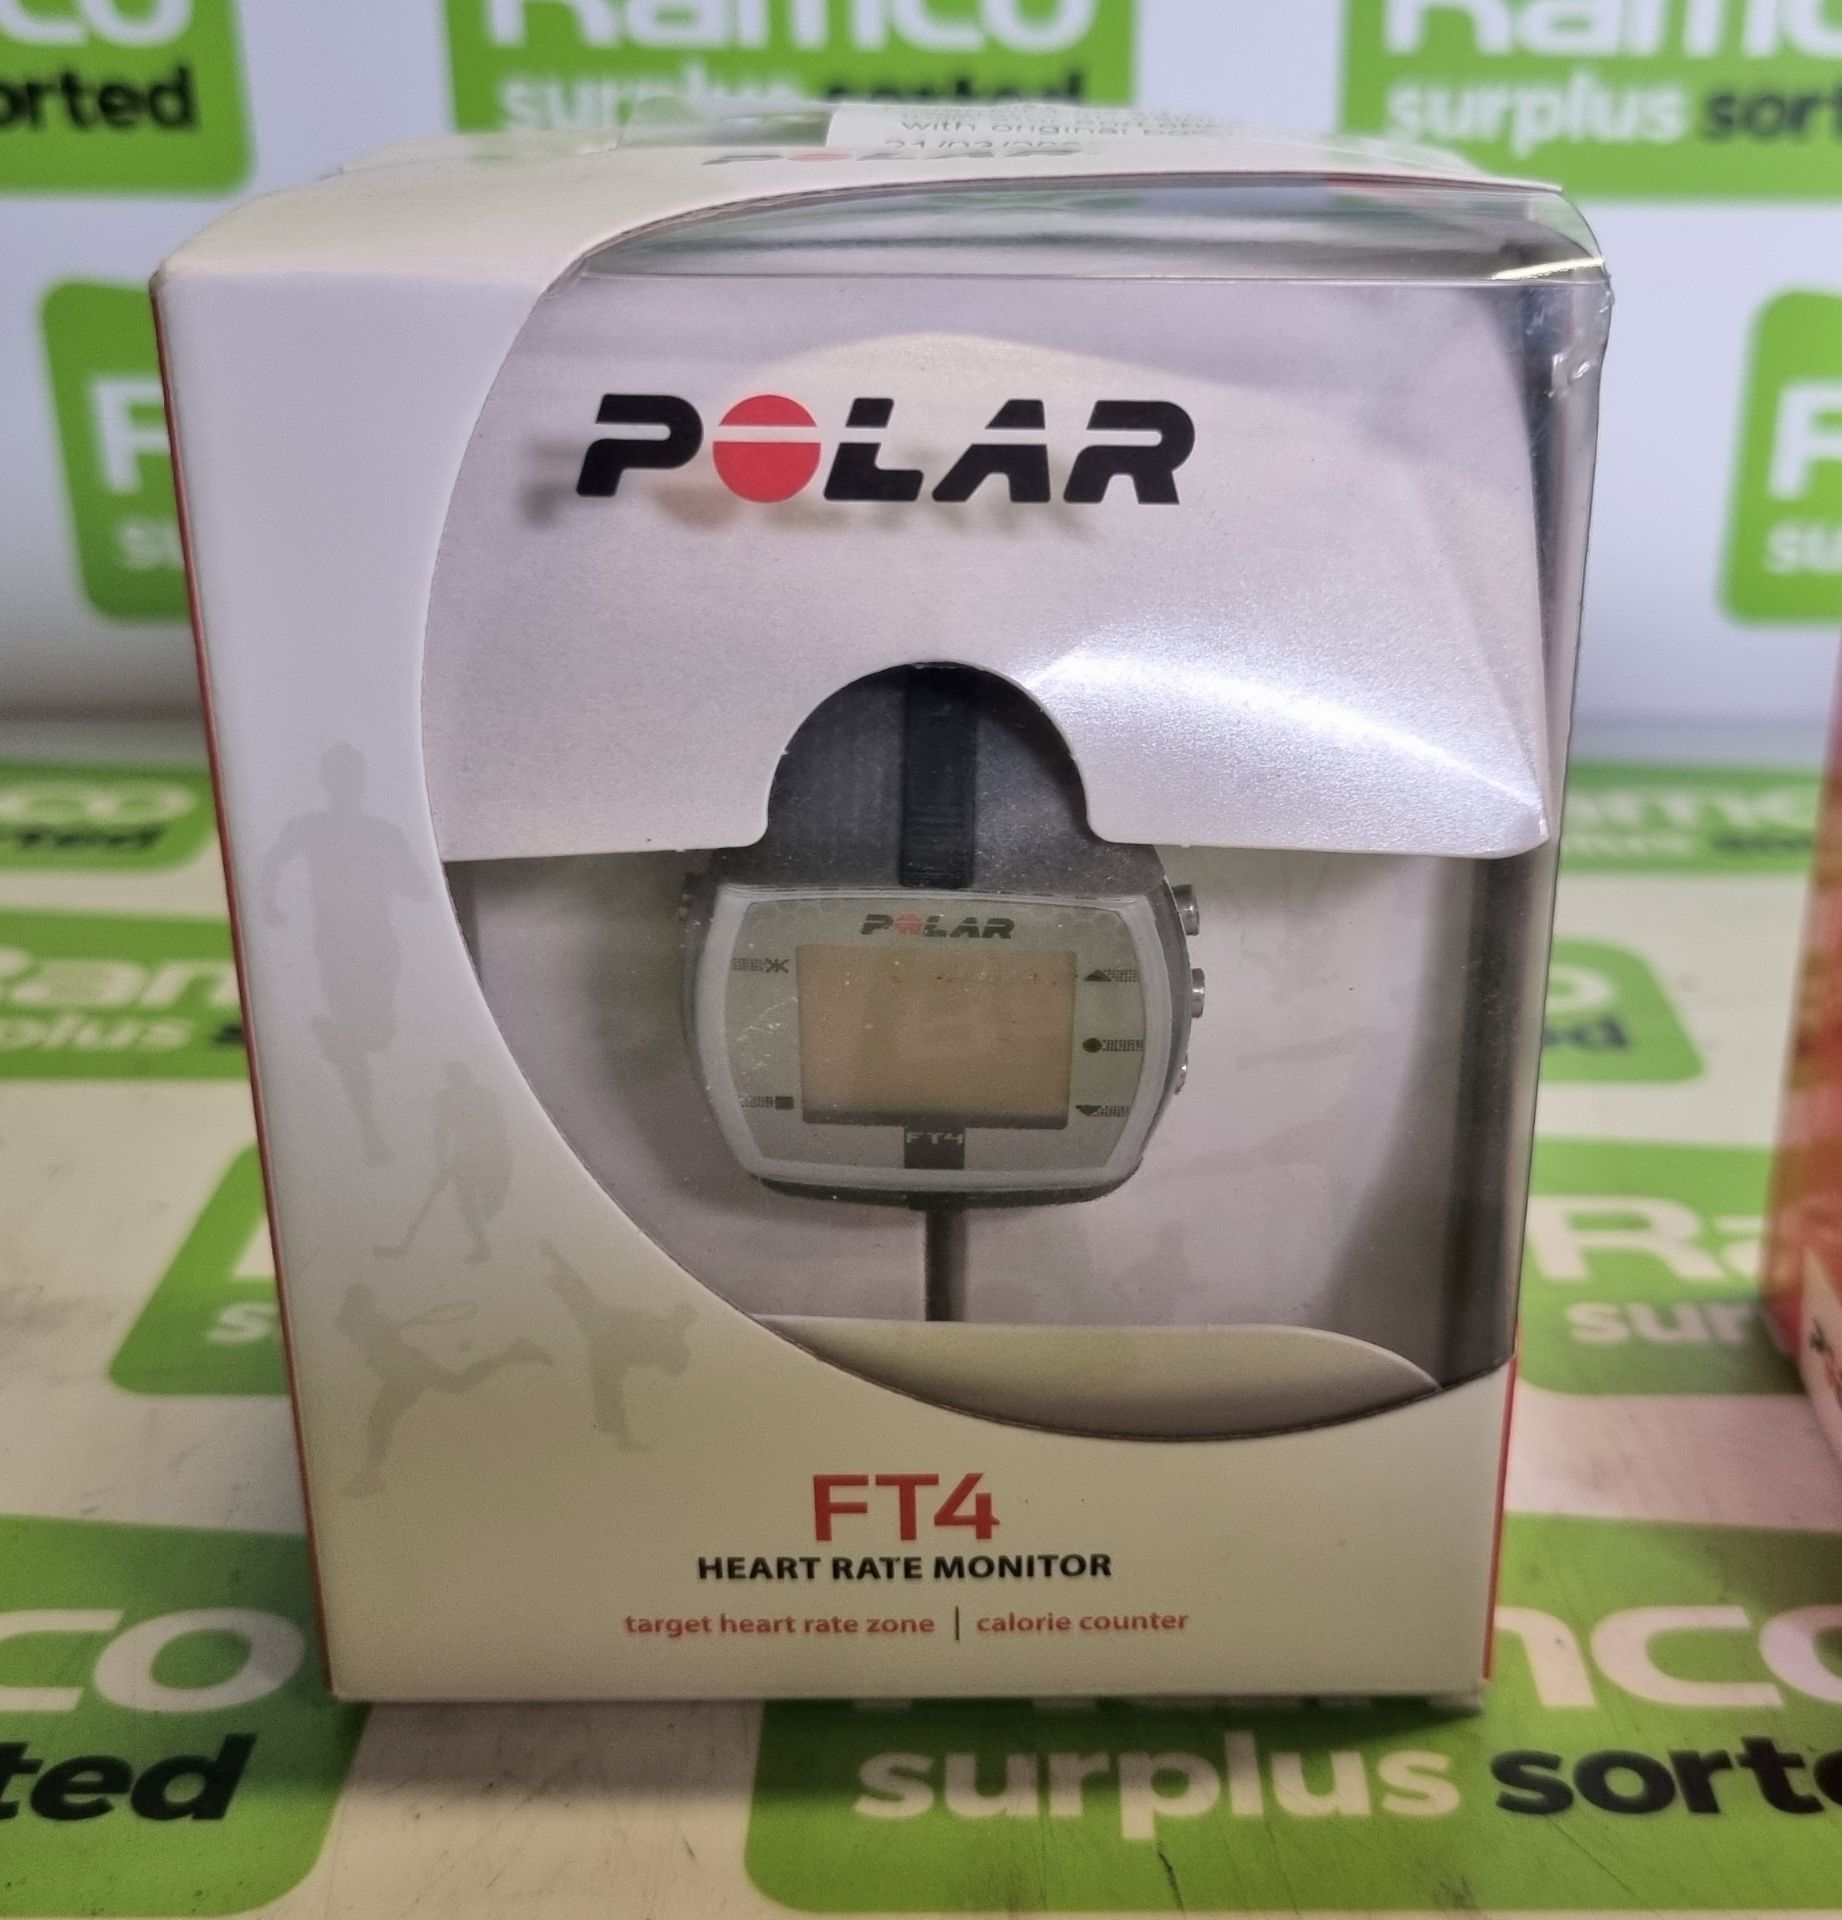 3x Polar FT4 Heart rate monitor watches with calorie count indicator and chest strap - Image 3 of 4